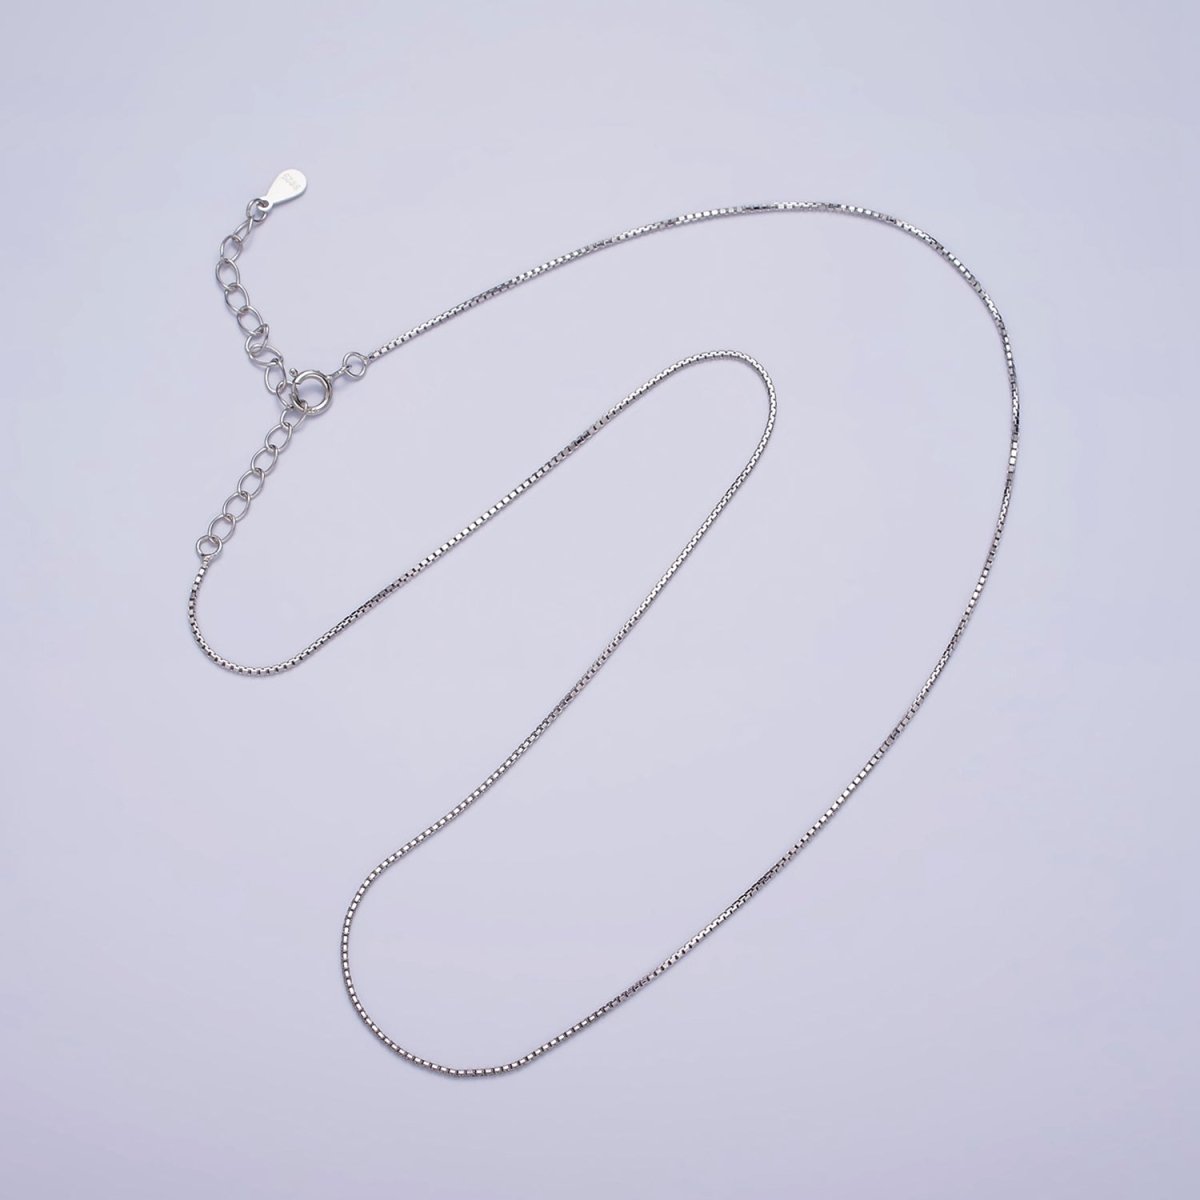 S925 Sterling Silver 0.8mm Dainty Box Chain 15.35 Inch Chain Choker Necklace | WA-1986 Clearance Pricing - DLUXCA